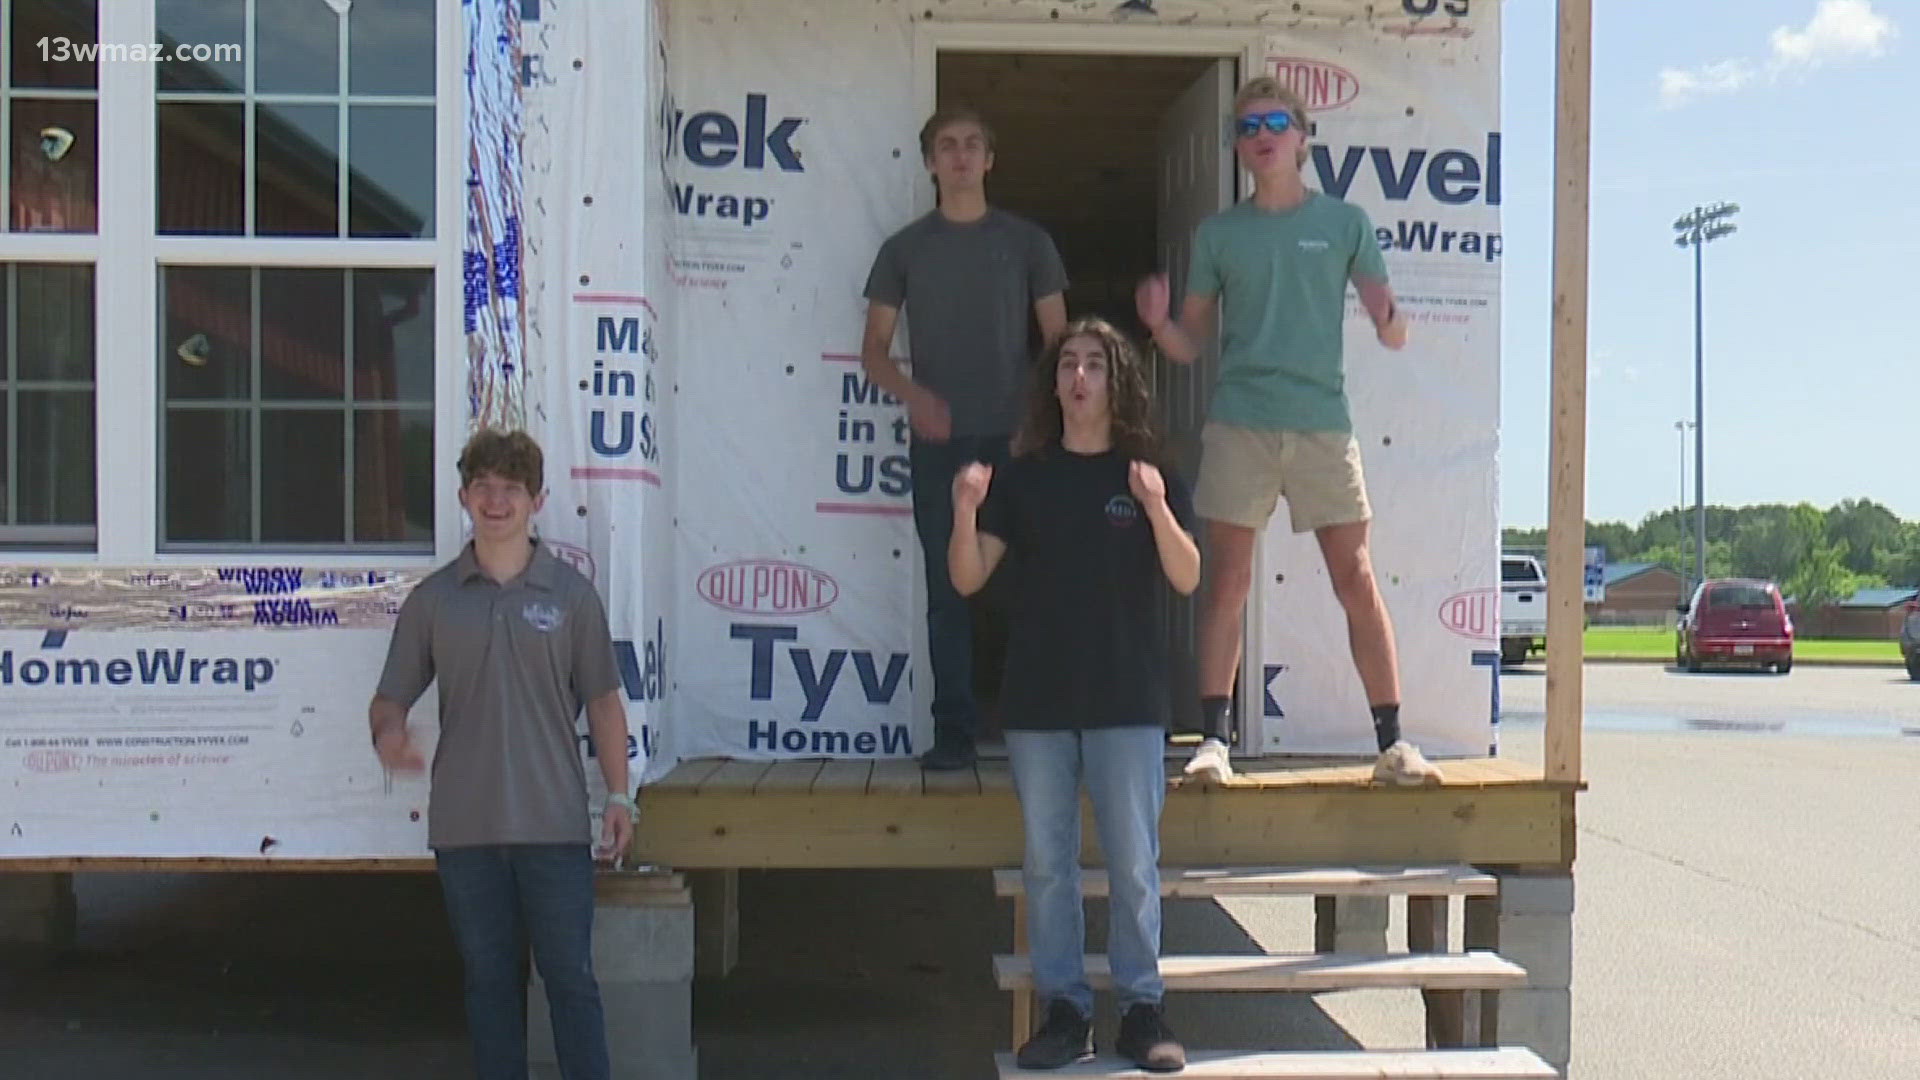 Students at West Laurens High School are building a path to success, and talked about their construction class and a special project they are working on.